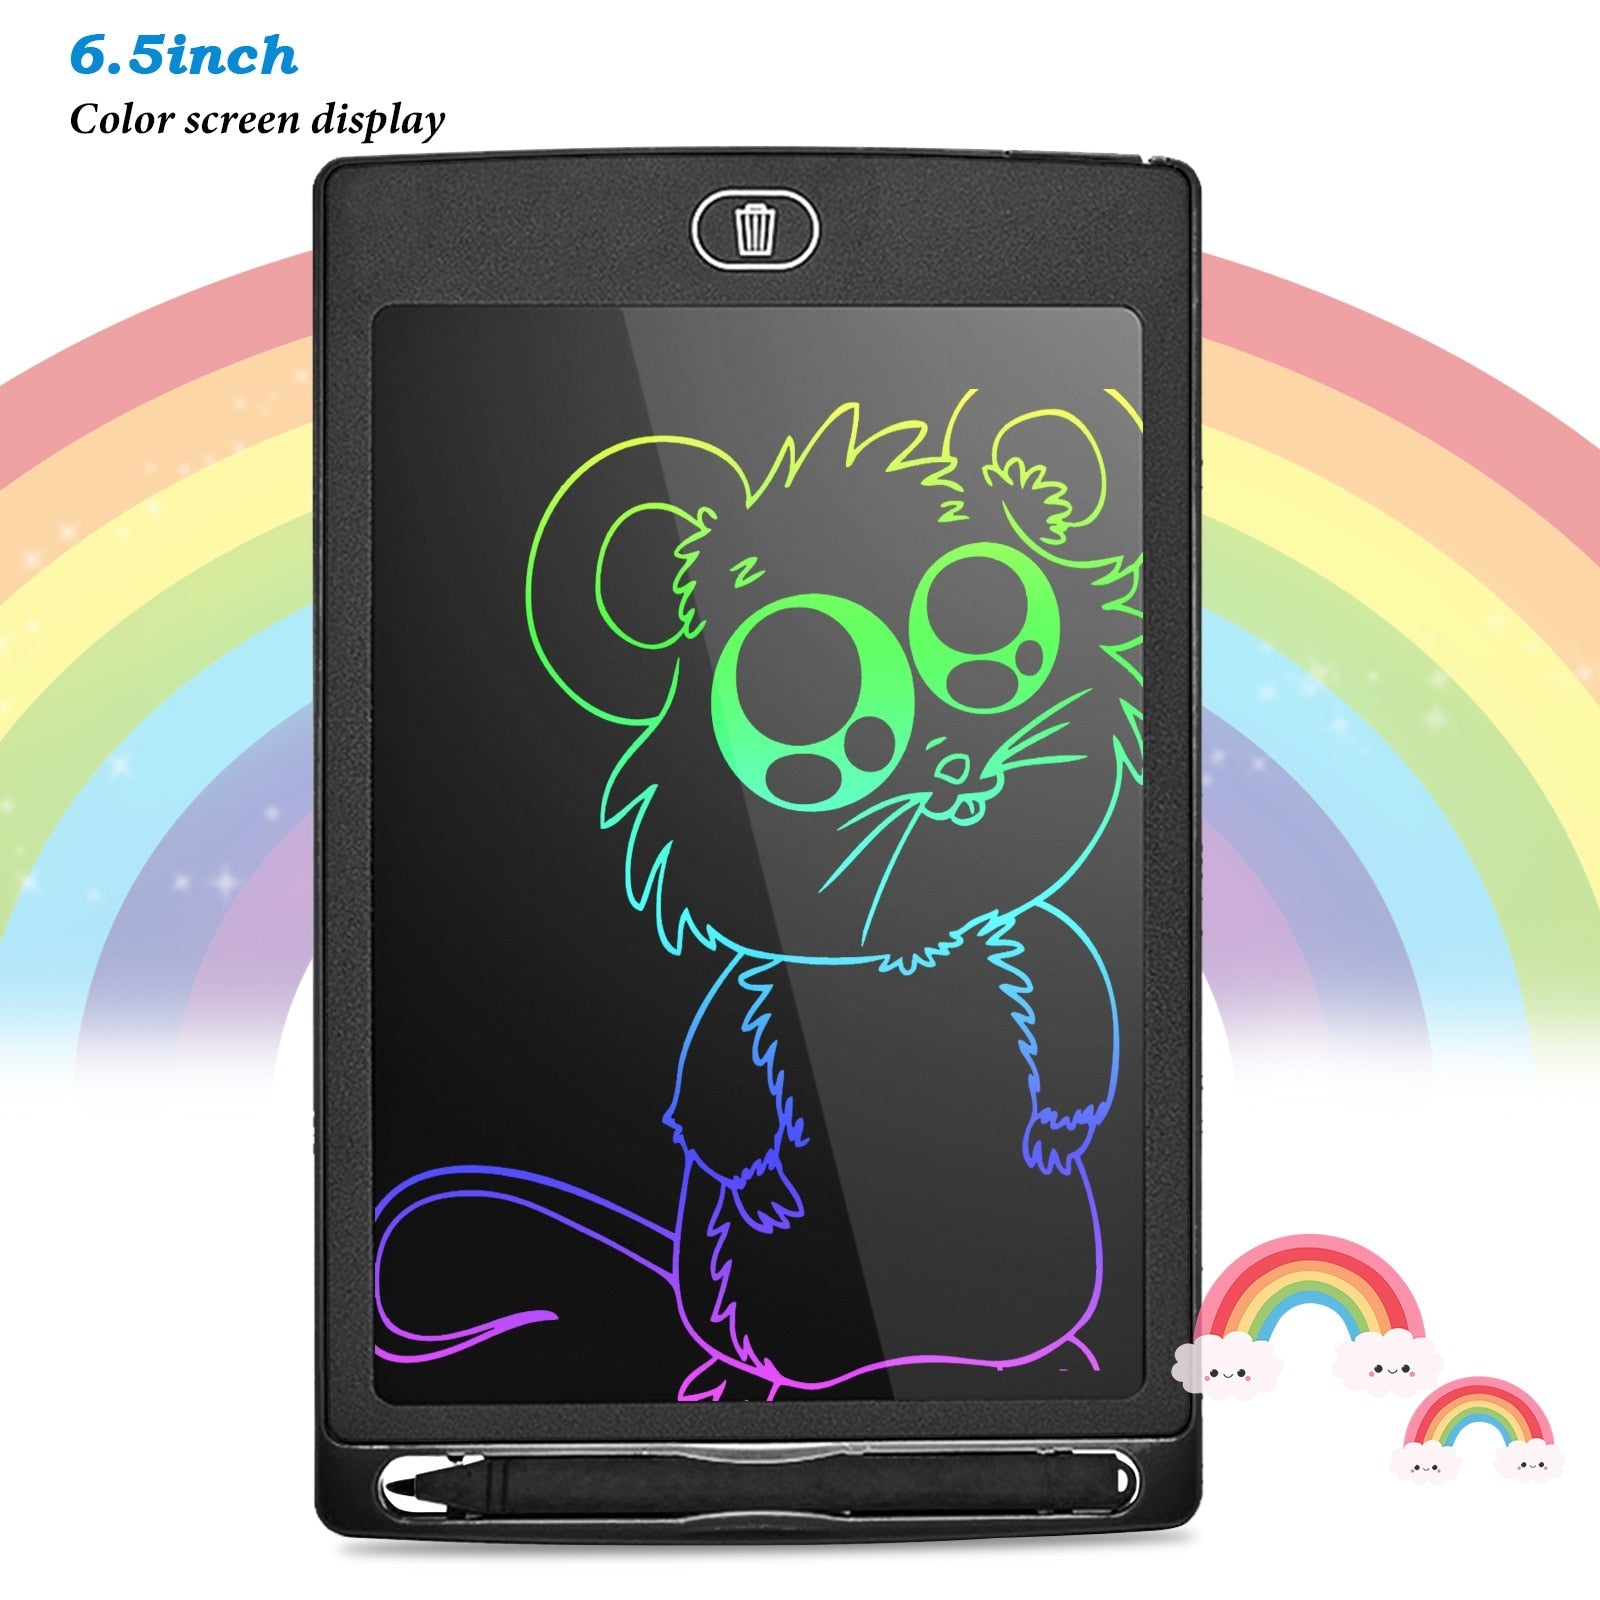 LCD Drawing Tablet for Children Toys - Montessori Vision